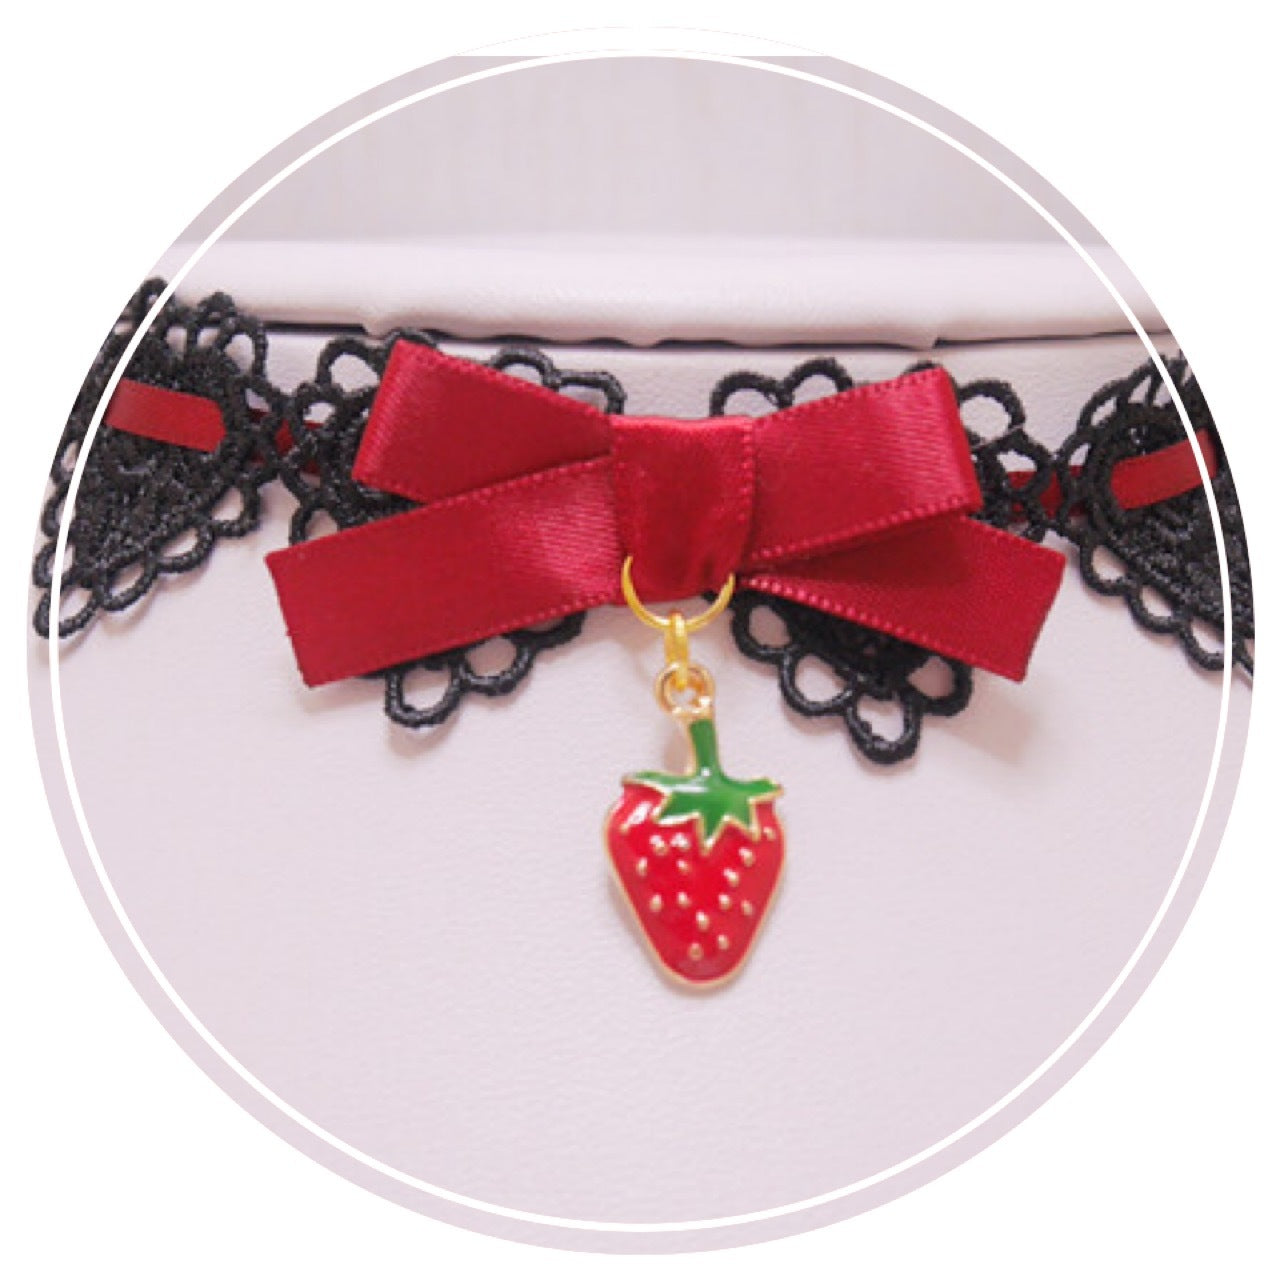 Cherry Strawberry Necklace AD12138